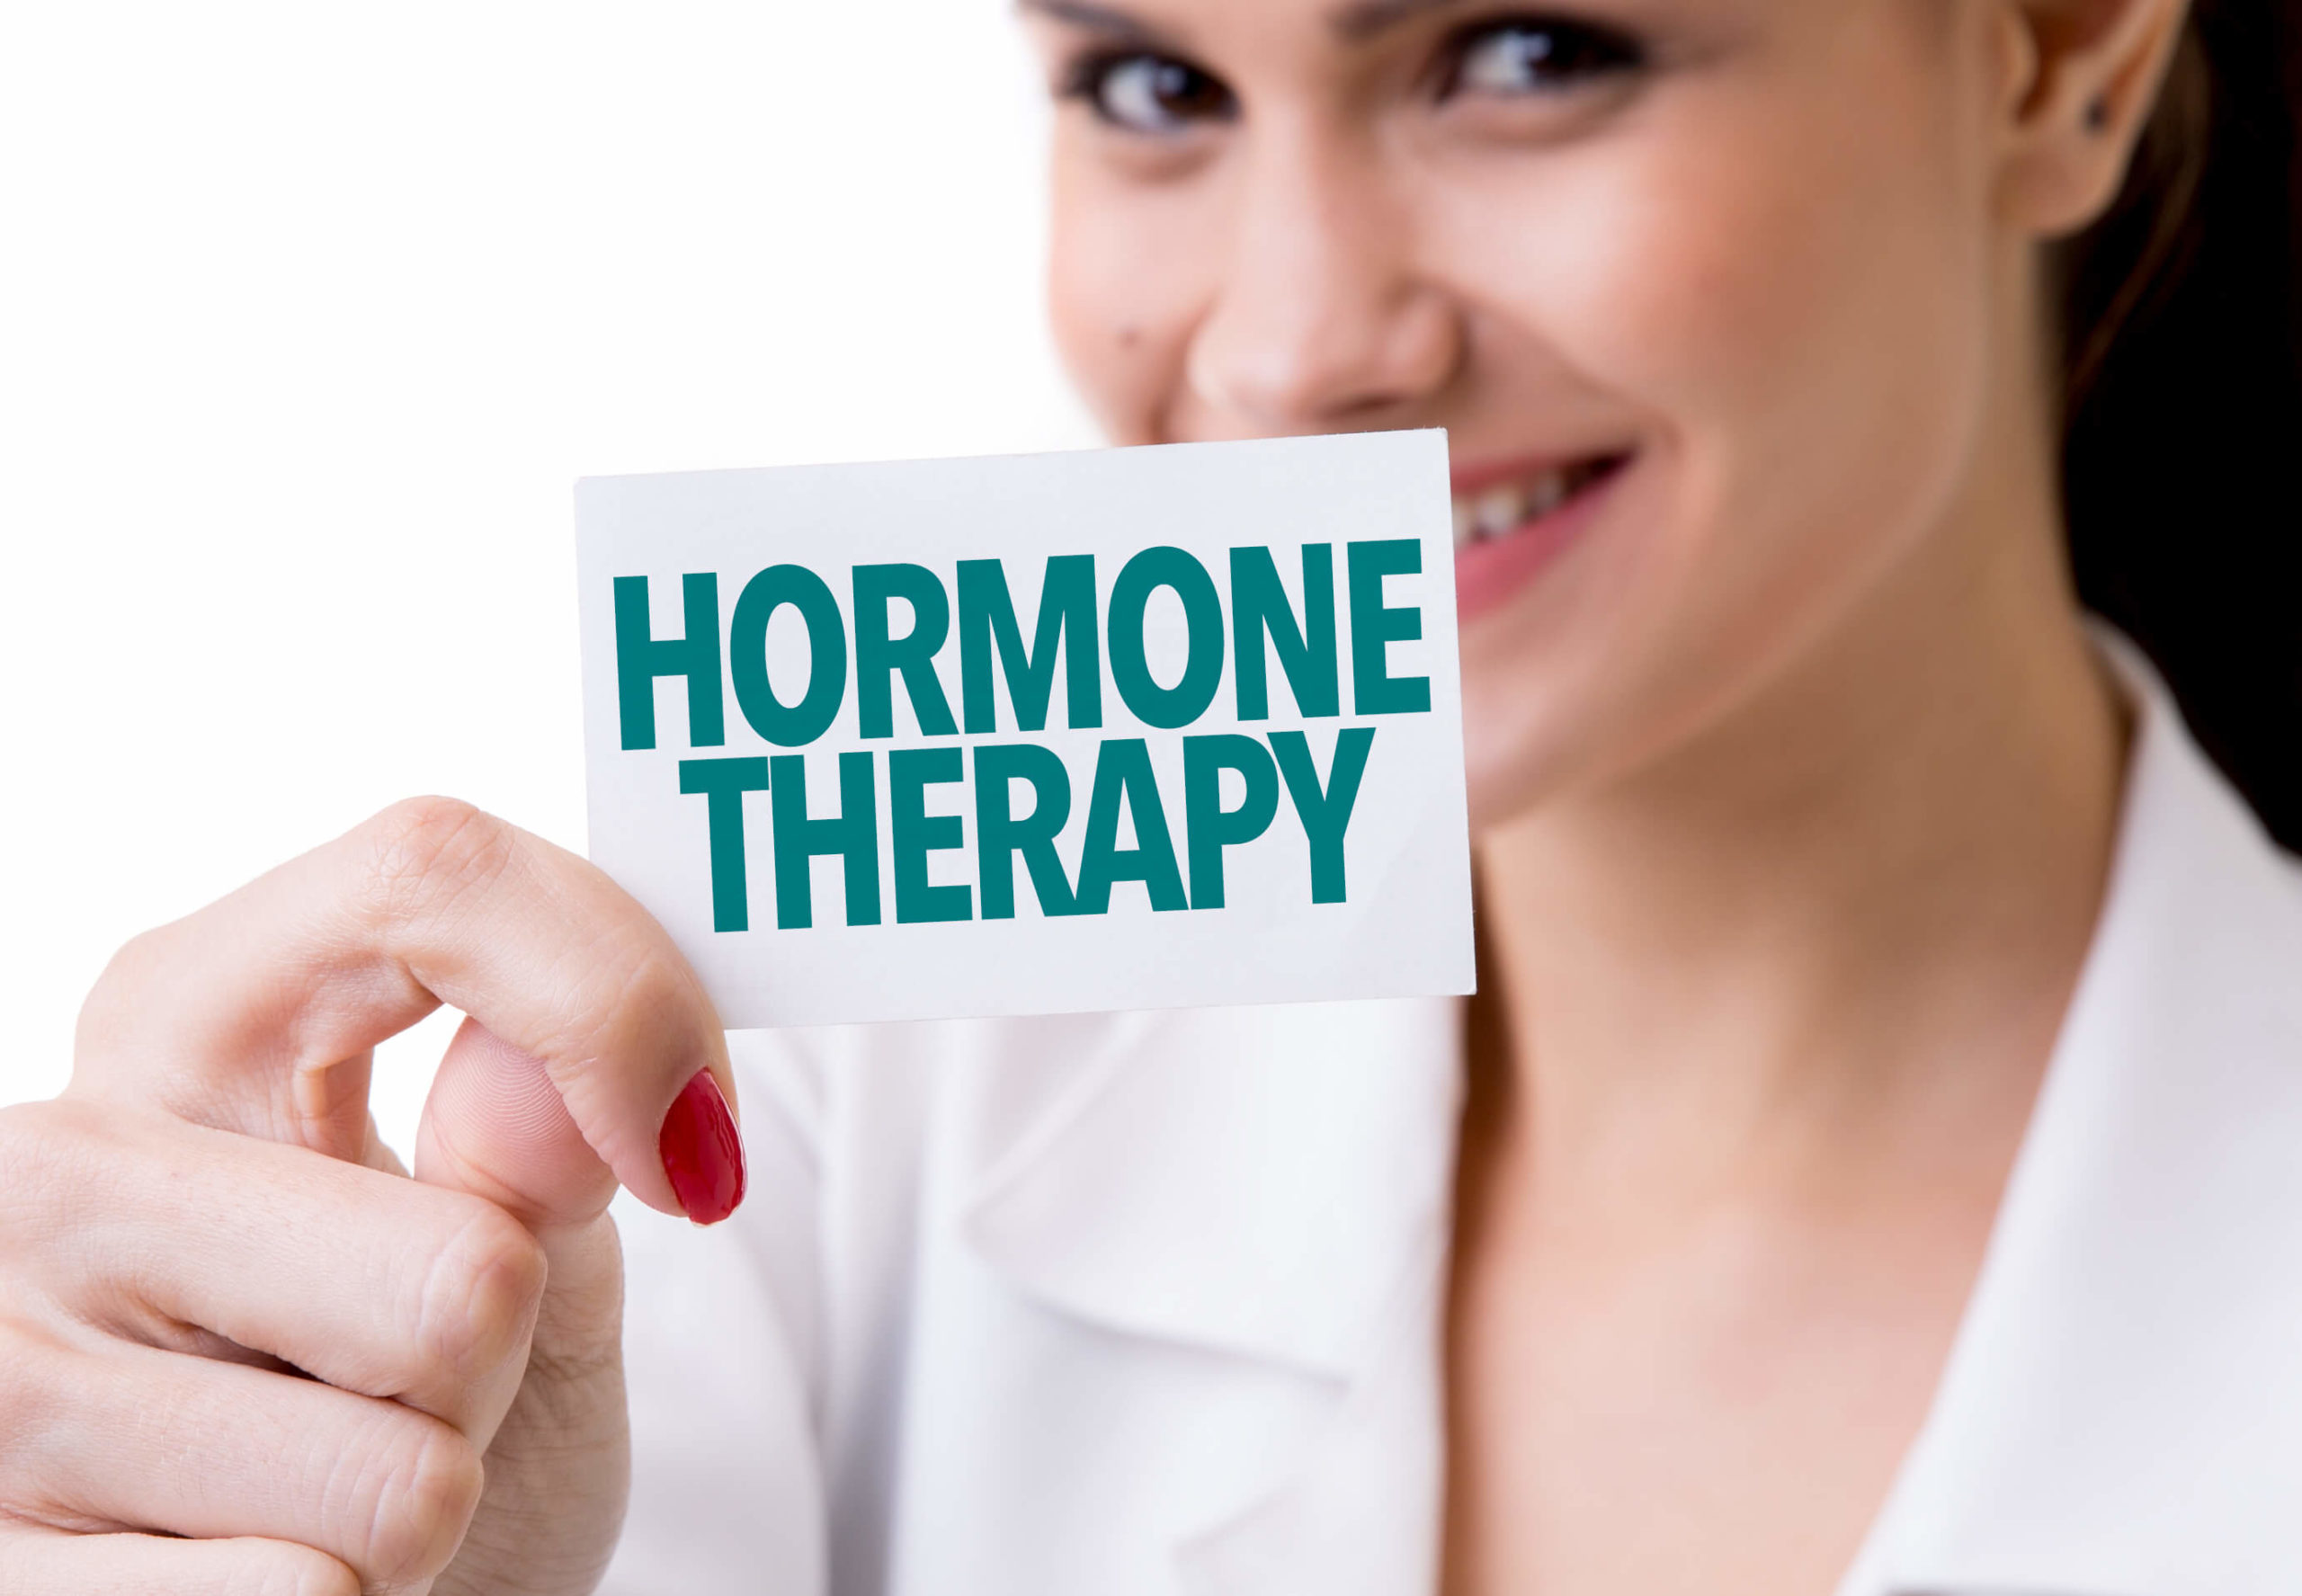 Does Hormone Replacement Therapy Really Make You Look Younger